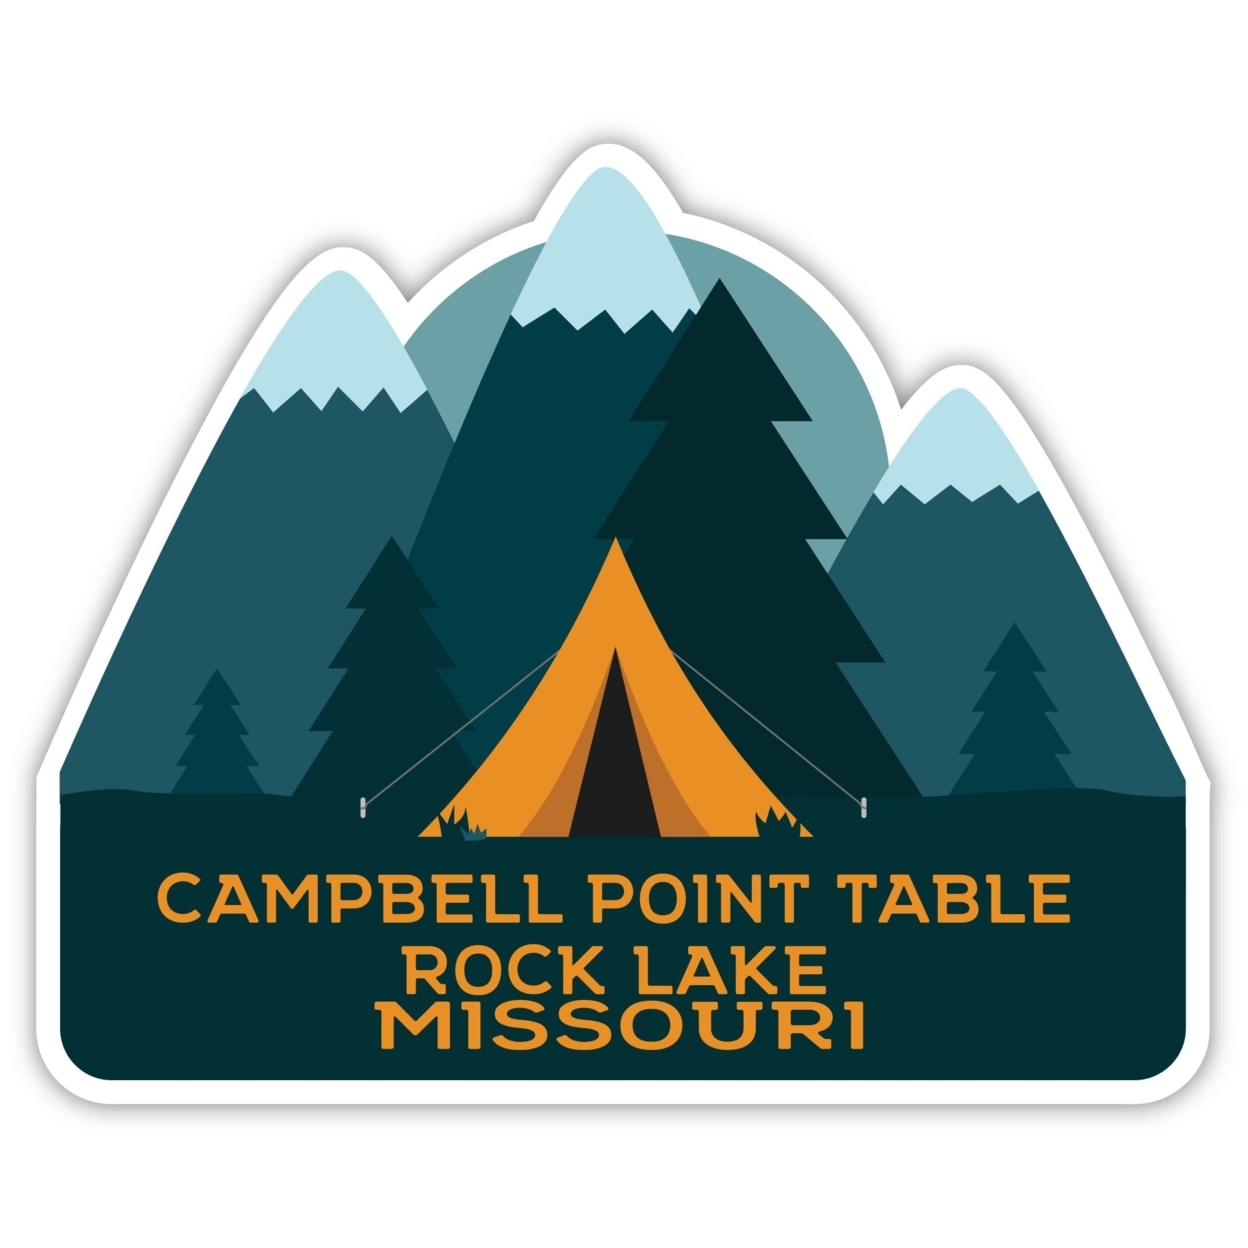 Campbell Point Table Rock Lake Missouri Souvenir Decorative Stickers (Choose Theme And Size) - 4-Pack, 8-Inch, Tent